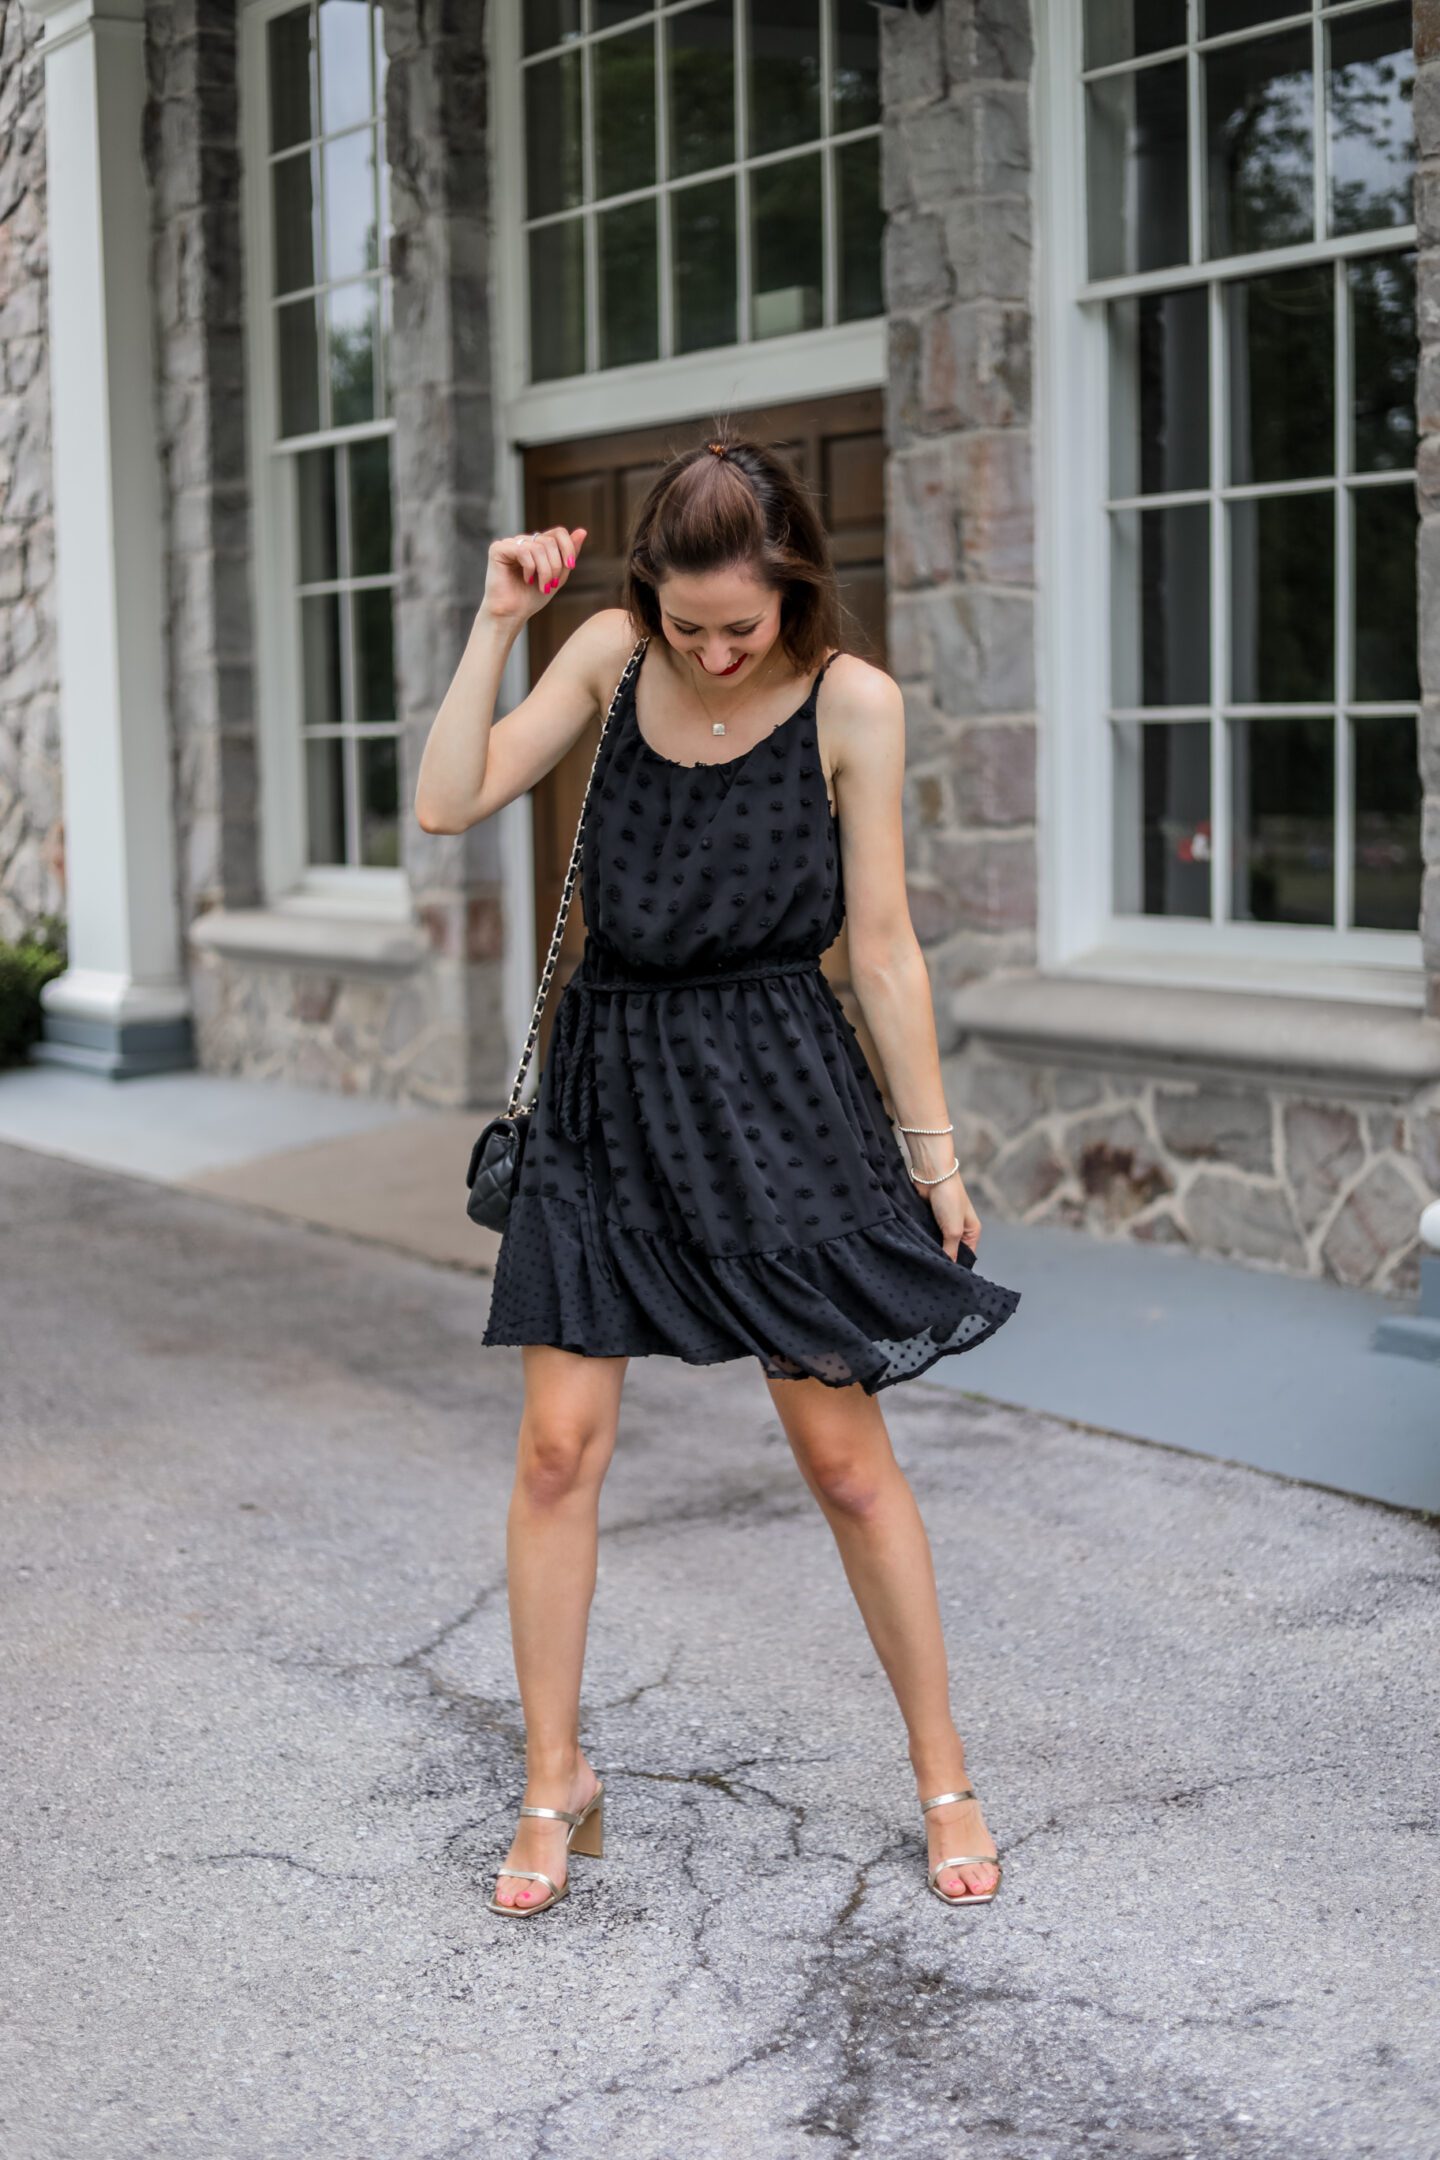 A PERFECT $30 LBD from Amazon - a must have little black dress and wardrobe staple!